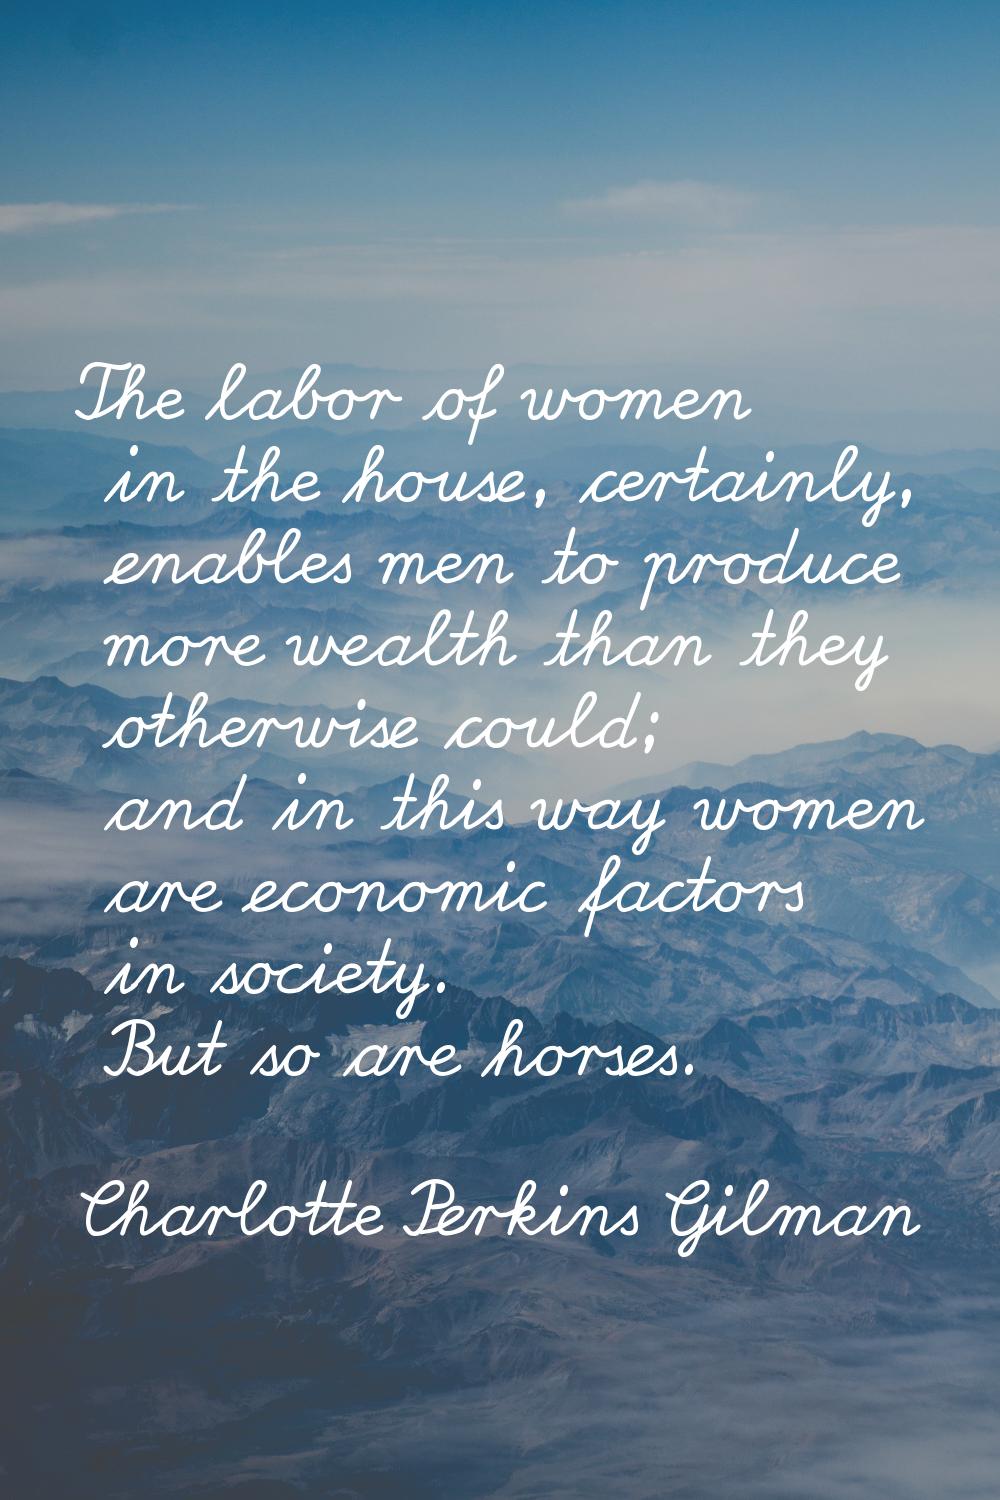 The labor of women in the house, certainly, enables men to produce more wealth than they otherwise 